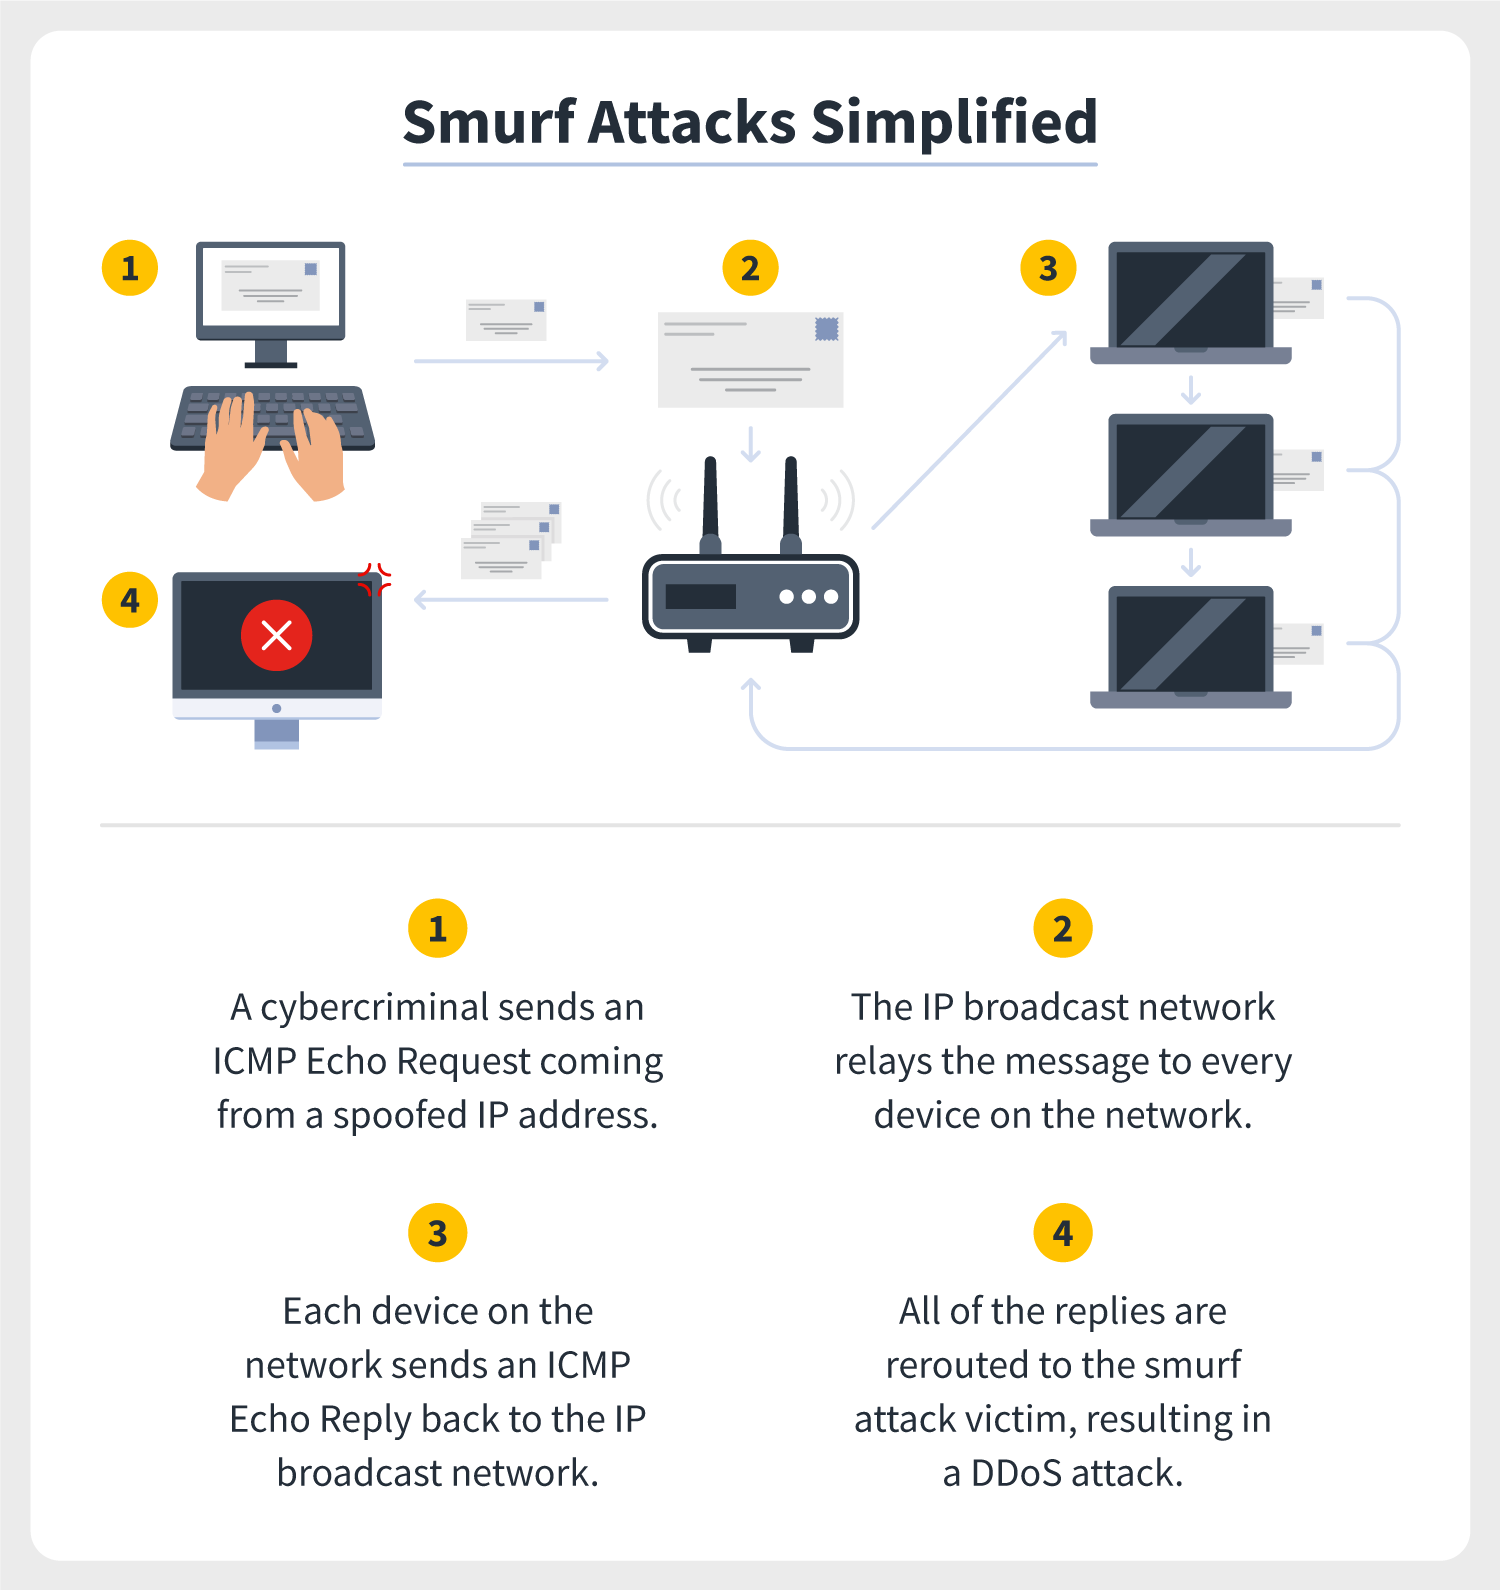 illustrations of computers, an IP broadcast network, and envelopes underscore how a smurf attack works